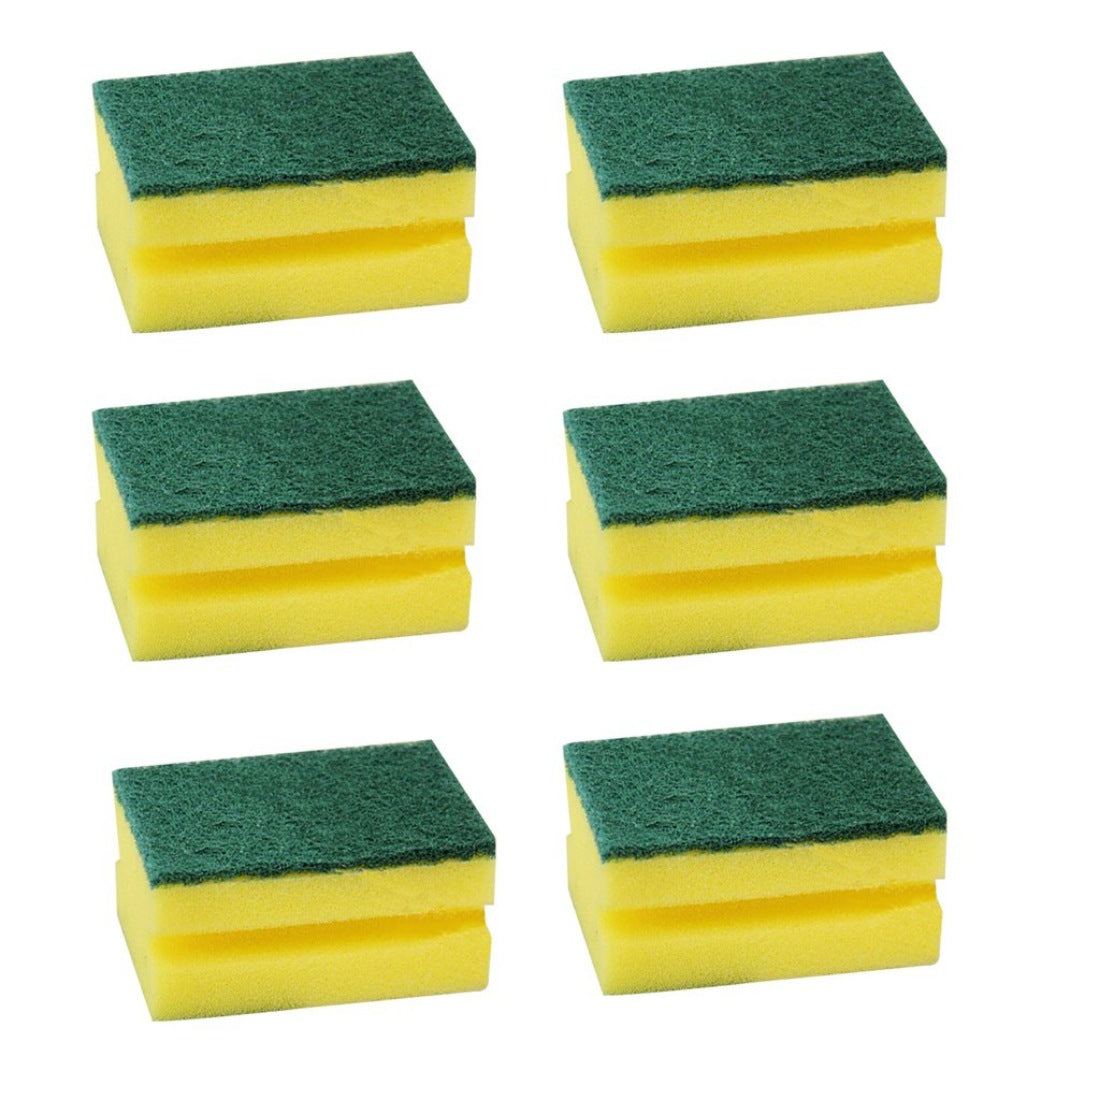 Pack Of 2_(2 Pieces Set)_Scrub Sponge 2 in 1 PAD for Kitchen, Sink, Bathroom Cleaning Scrubber (Color: Assorted) - GillKart